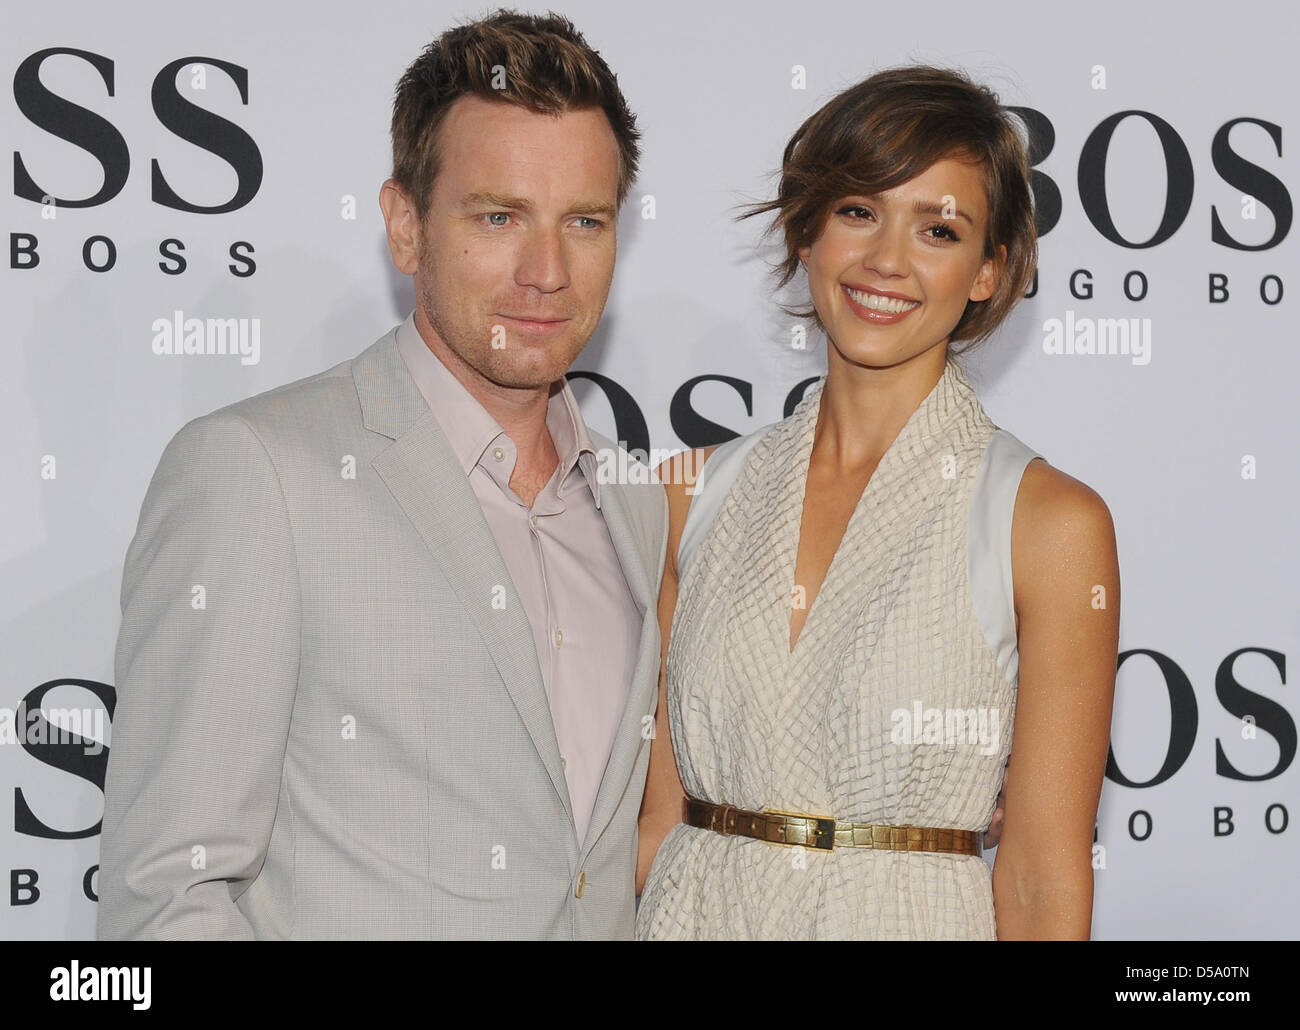 The Scottish actor Ewan McGregor (L) and the American actress Jessica Alba  (R) visit the show of Hugo Boss during the Mercedes-Benz Fashion Week in  Berlin, Germany, 8 July 2010. Until 11